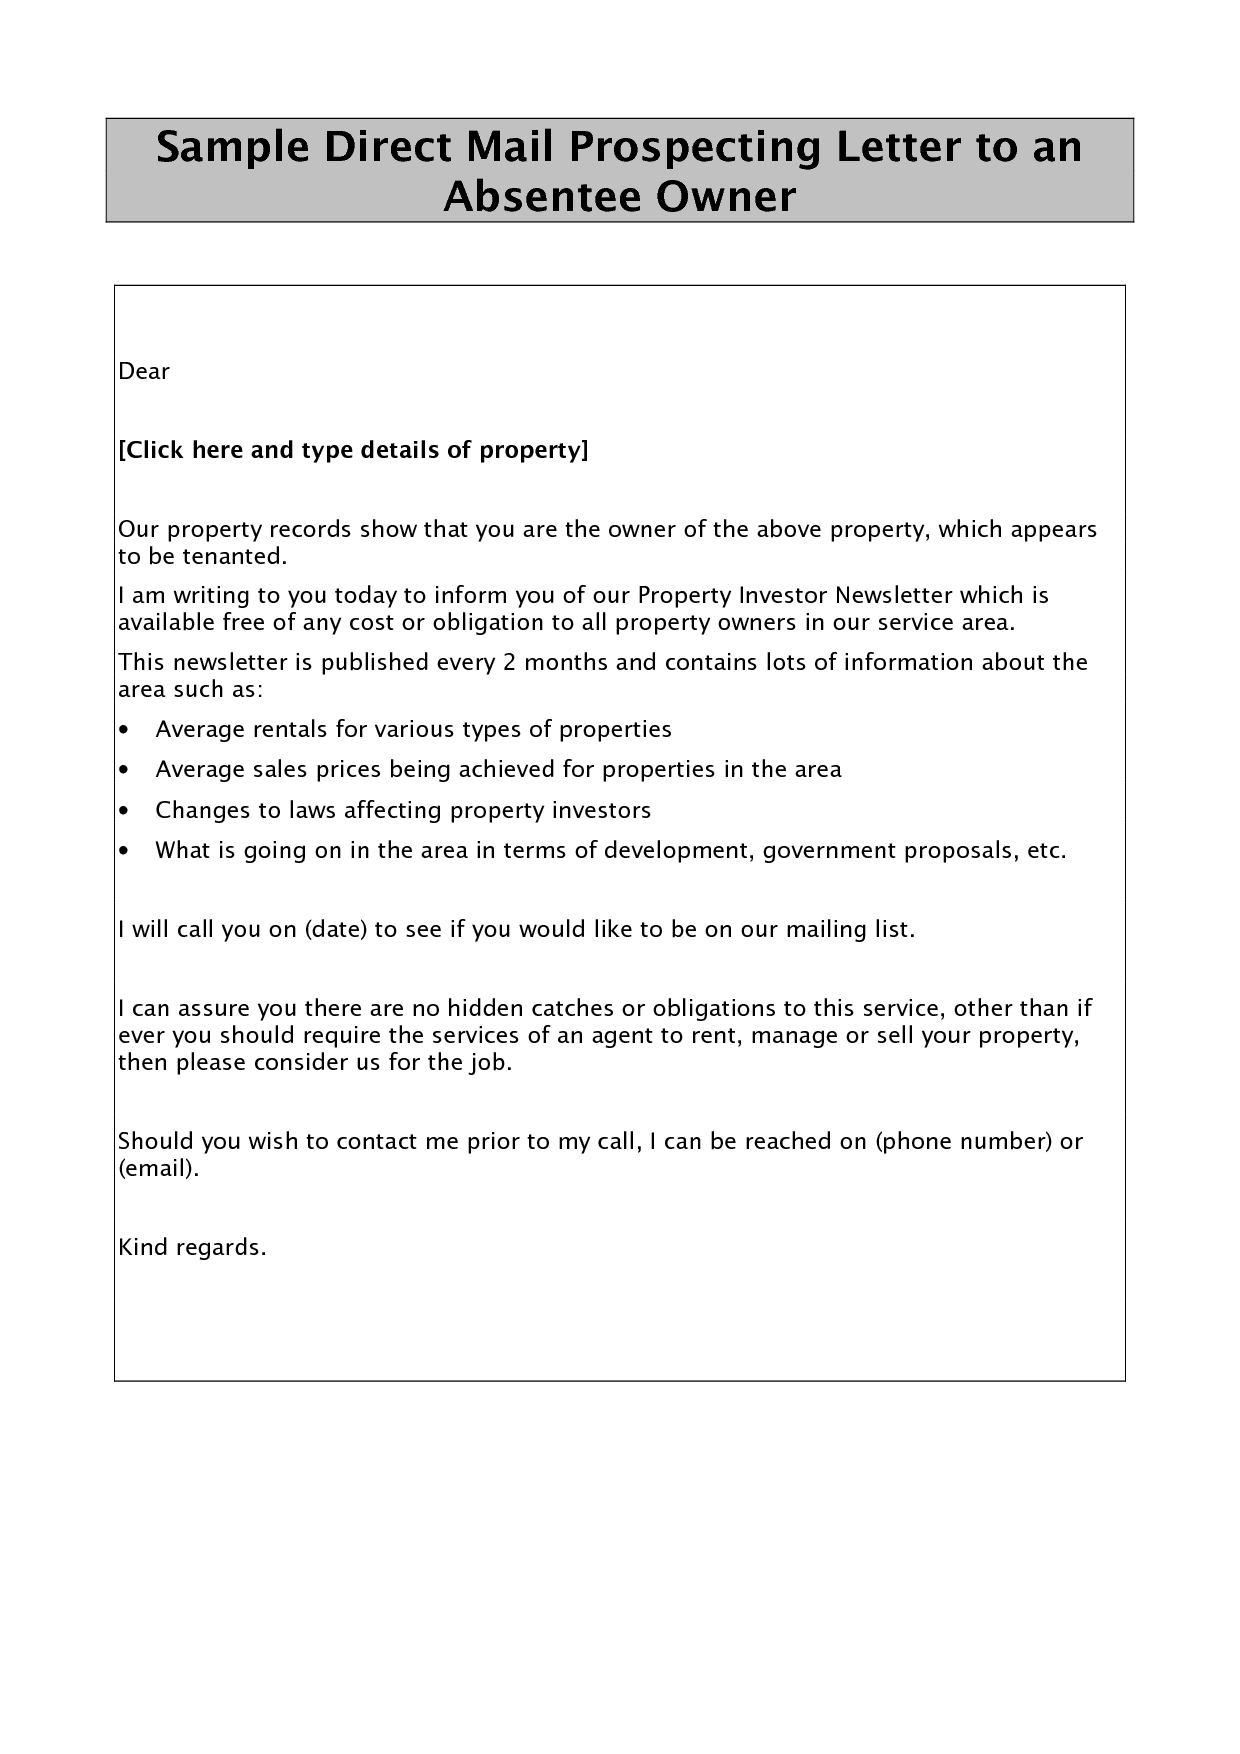 Real Estate Prospecting Letter Template - Prospecting Letter Template Free Real Estate Prospecting Letters